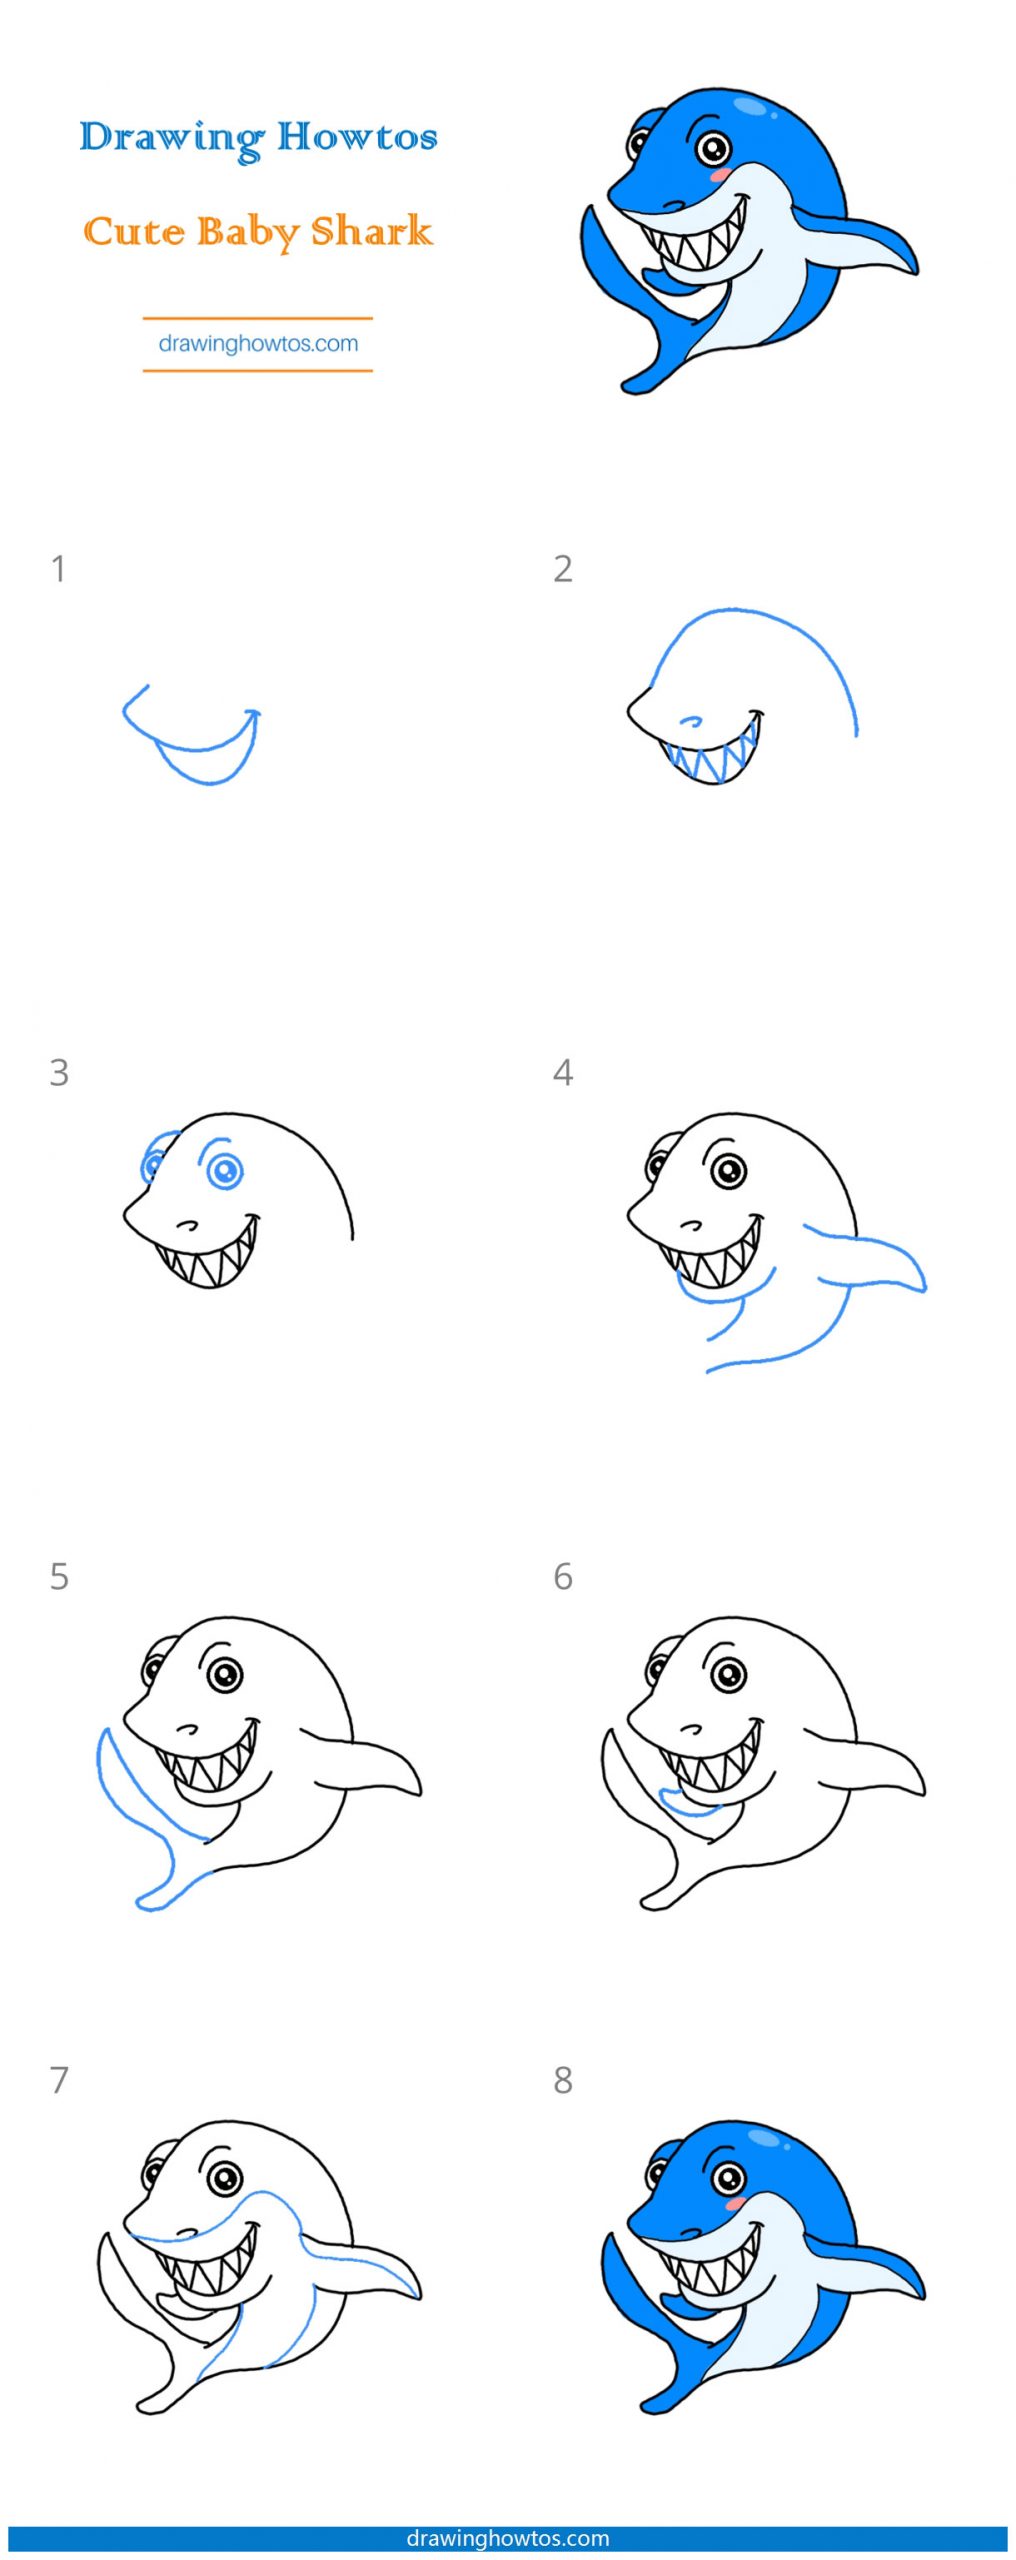 How to Draw a Cute Baby Shark Step by Step